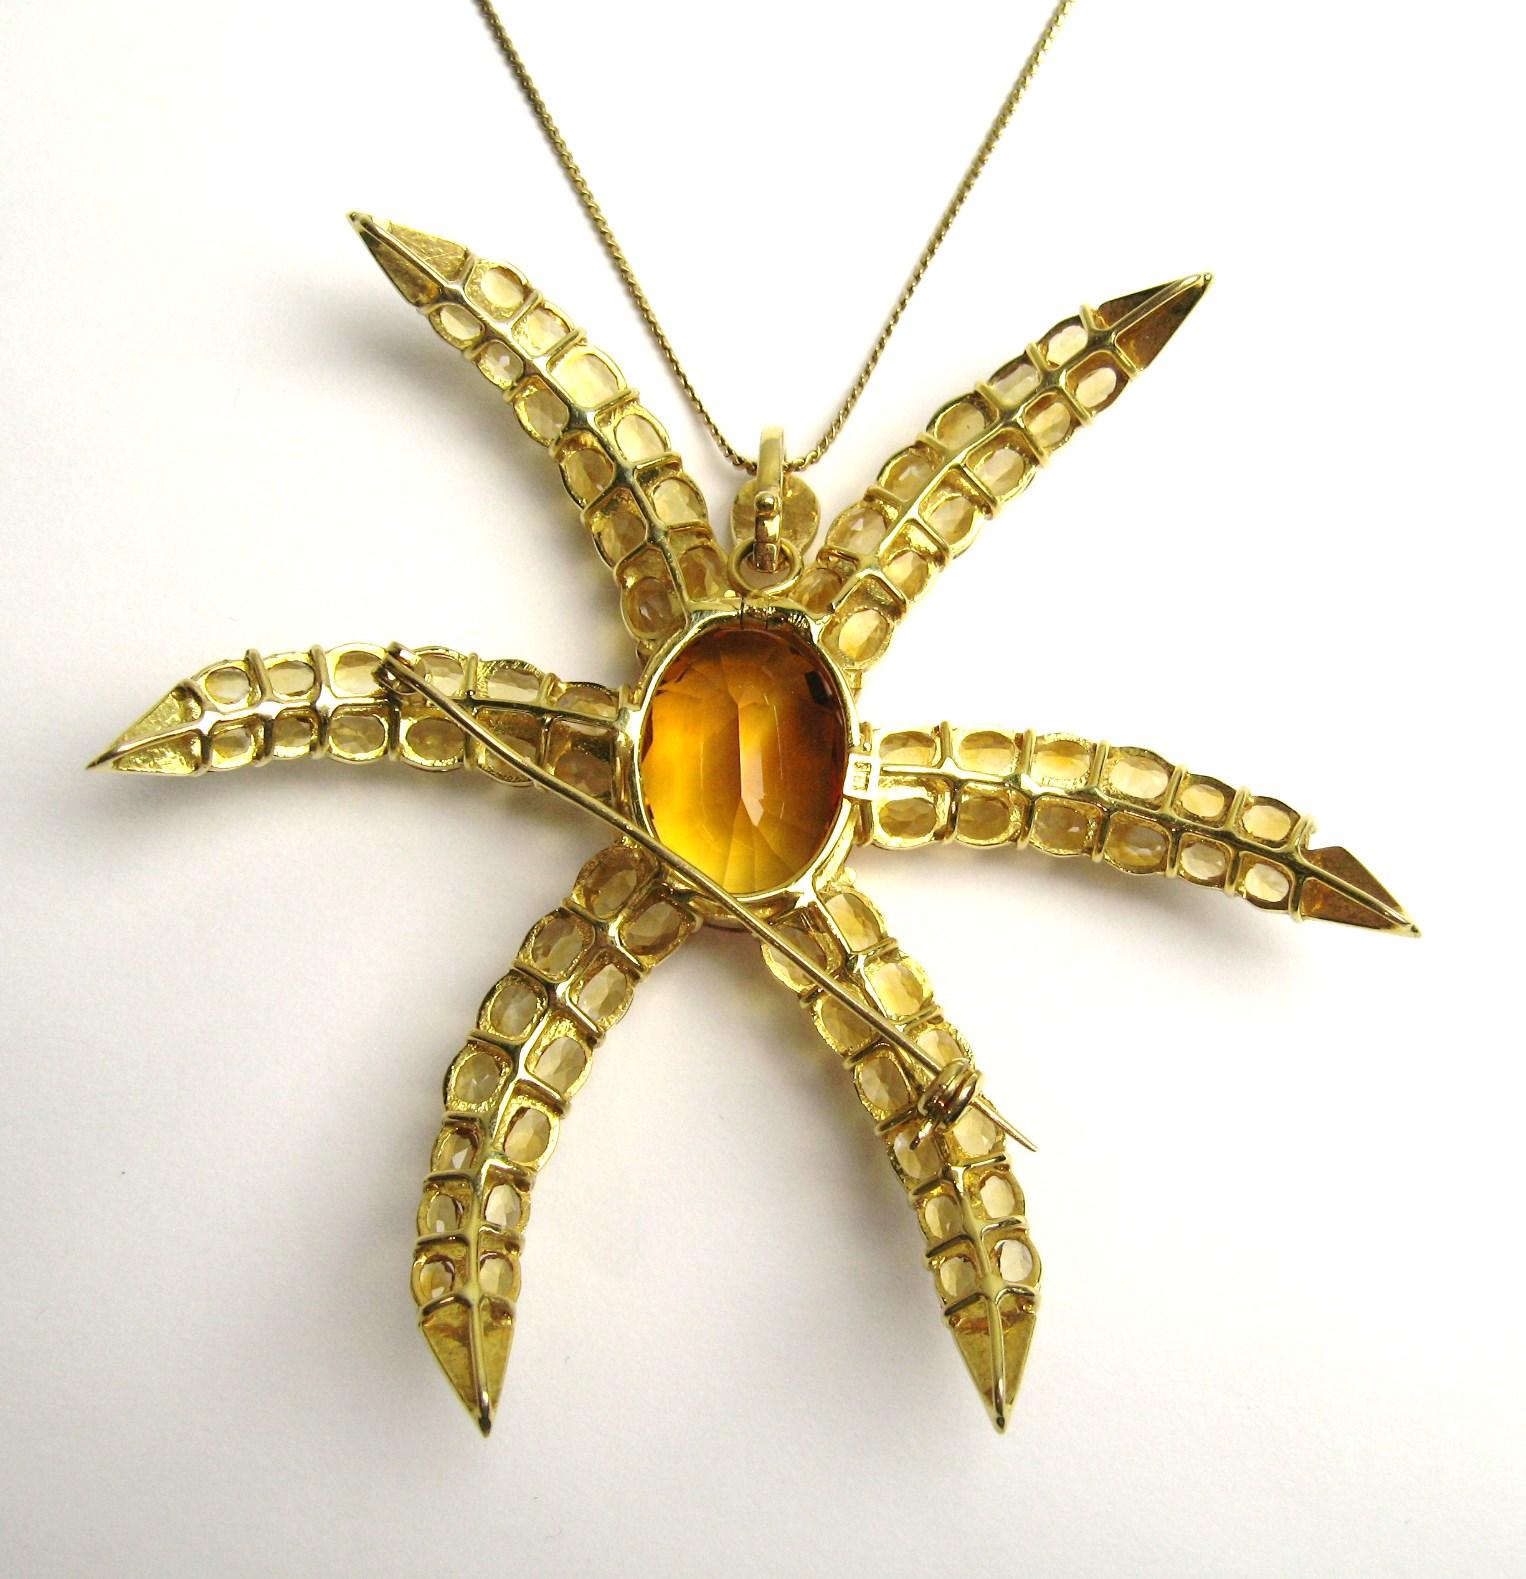 18 Karat Gold Citrine Star Motif Pendant Necklace Brooch 45 Carat In Excellent Condition For Sale In Wallkill, NY